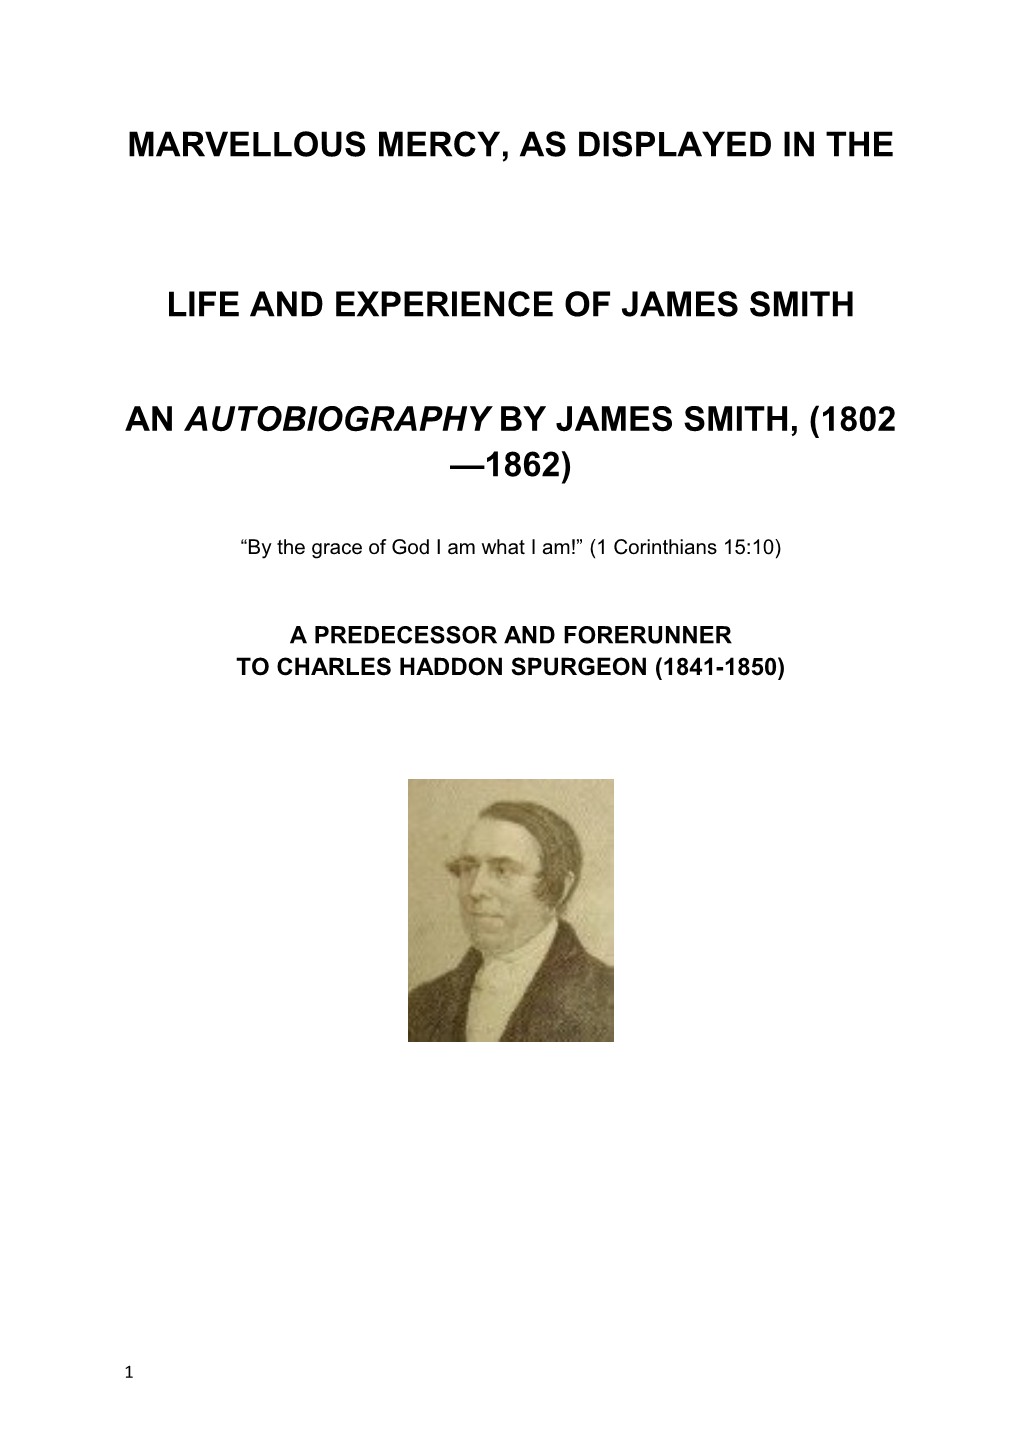 An Autobiography by James Smith, (1802 1862)